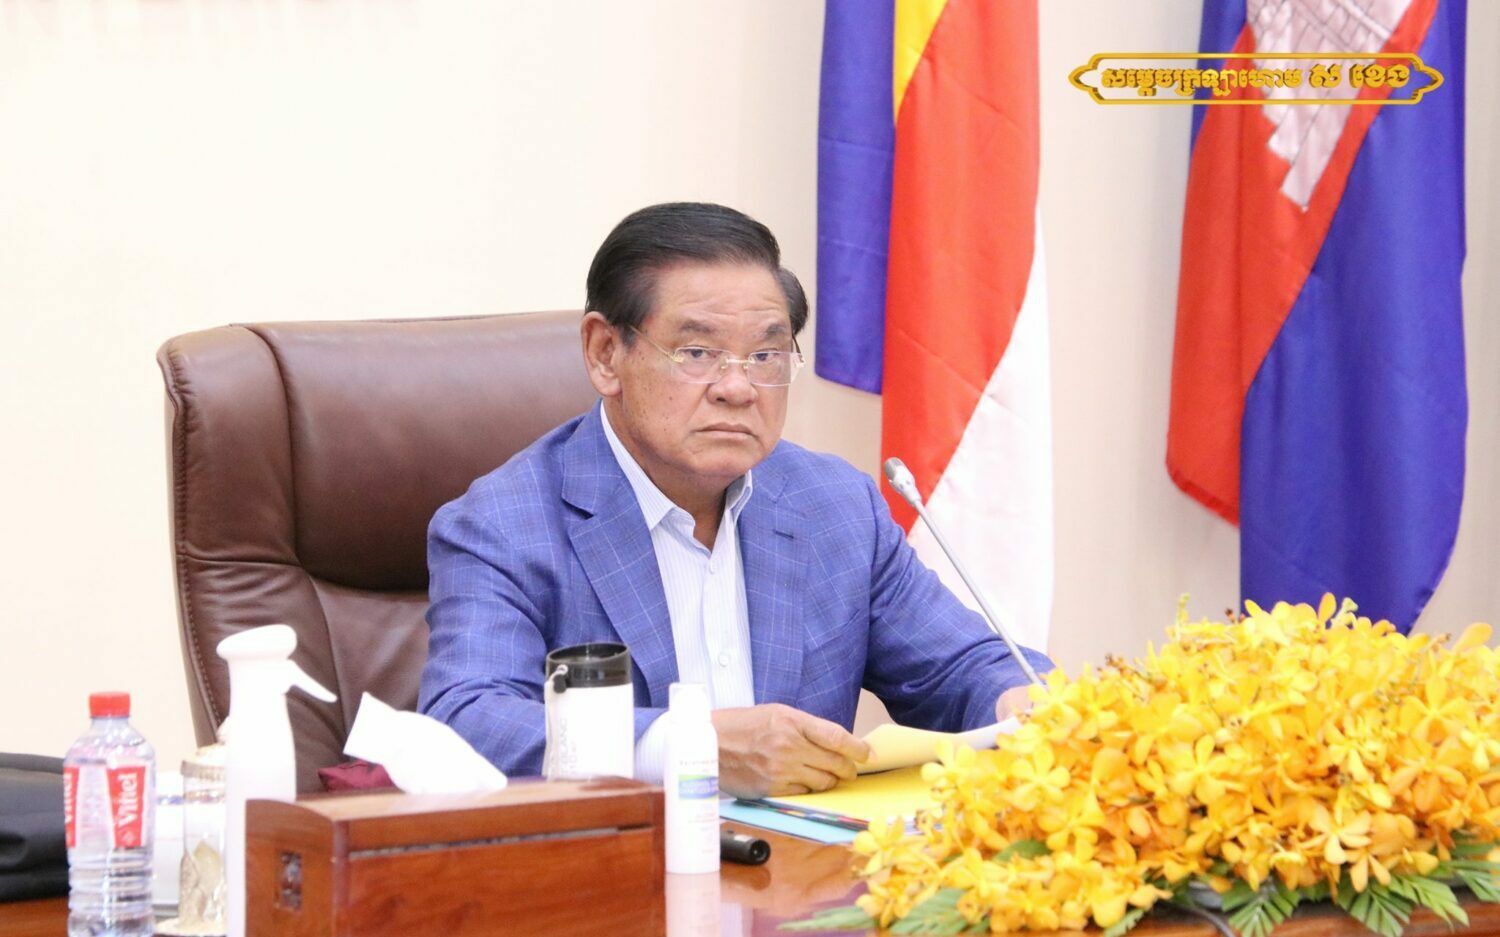 Interior Minister Sar Kheng at a meeting to address human trafficking, held in Phnom Penh on Friday, August 26, 2022. Photo from the Facebook page of Sar Kheng.